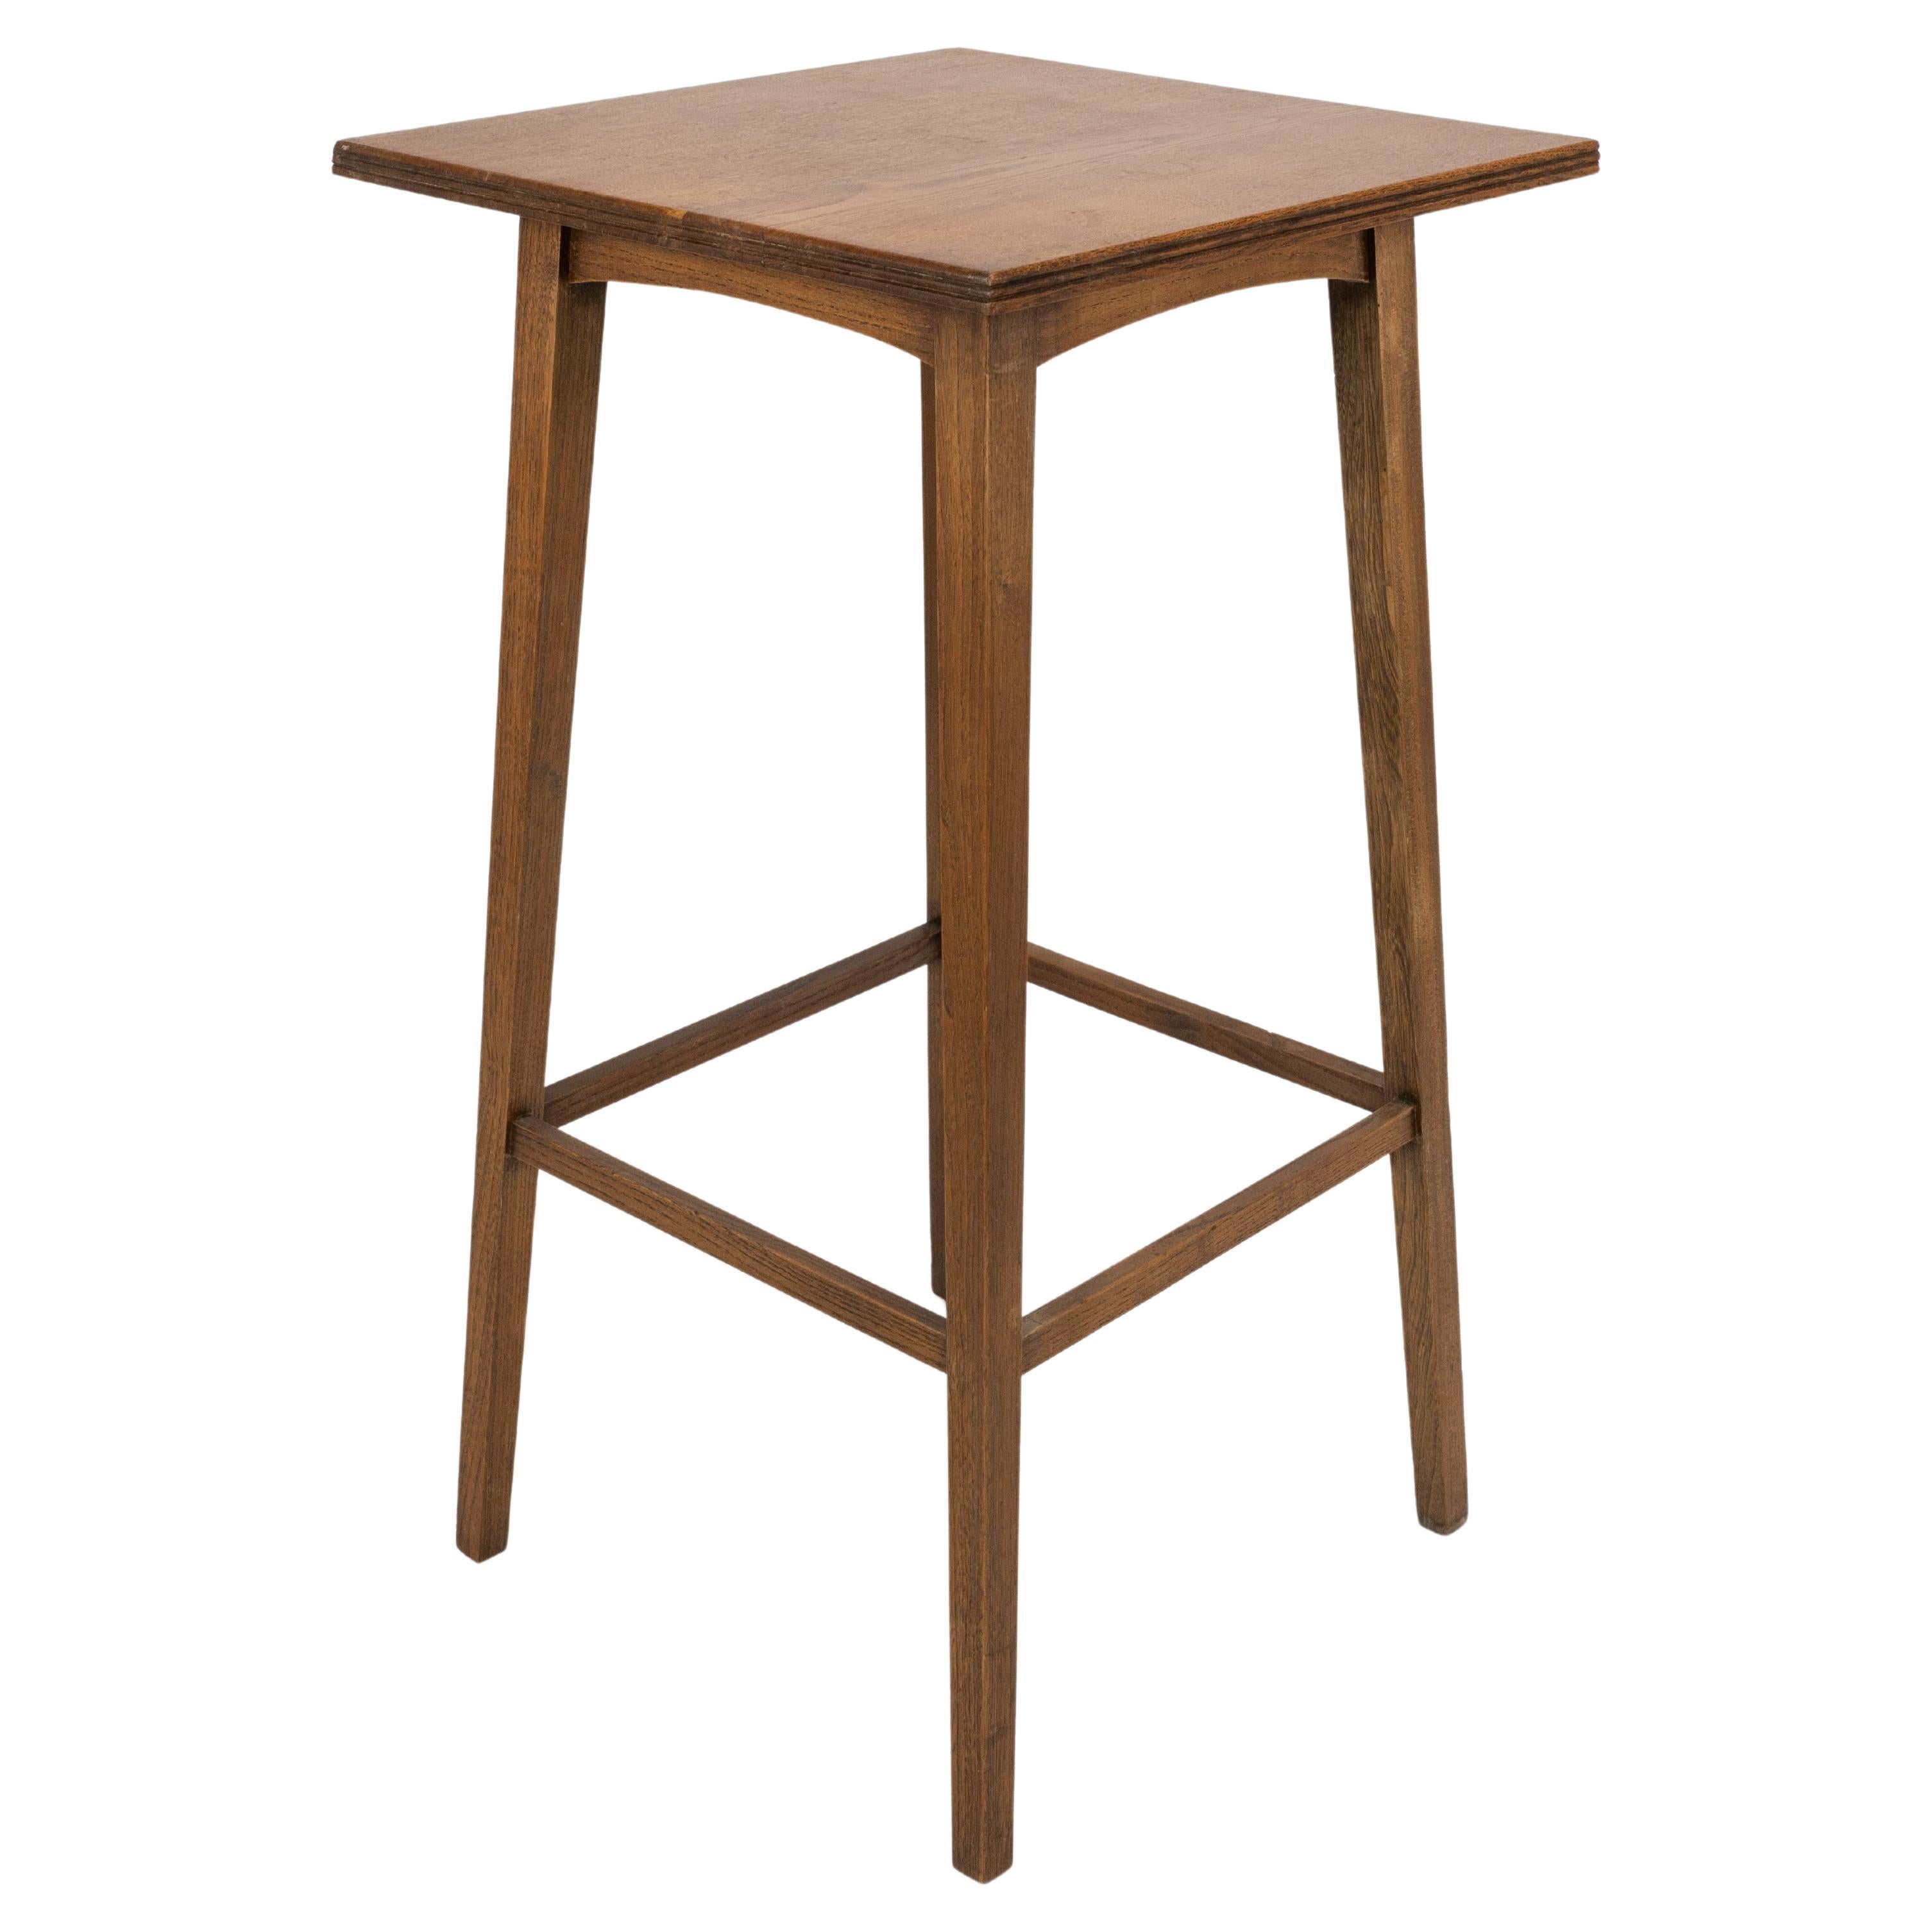 Shapland & Petter A small Arts & Crafts Ash side table with square tapering legs